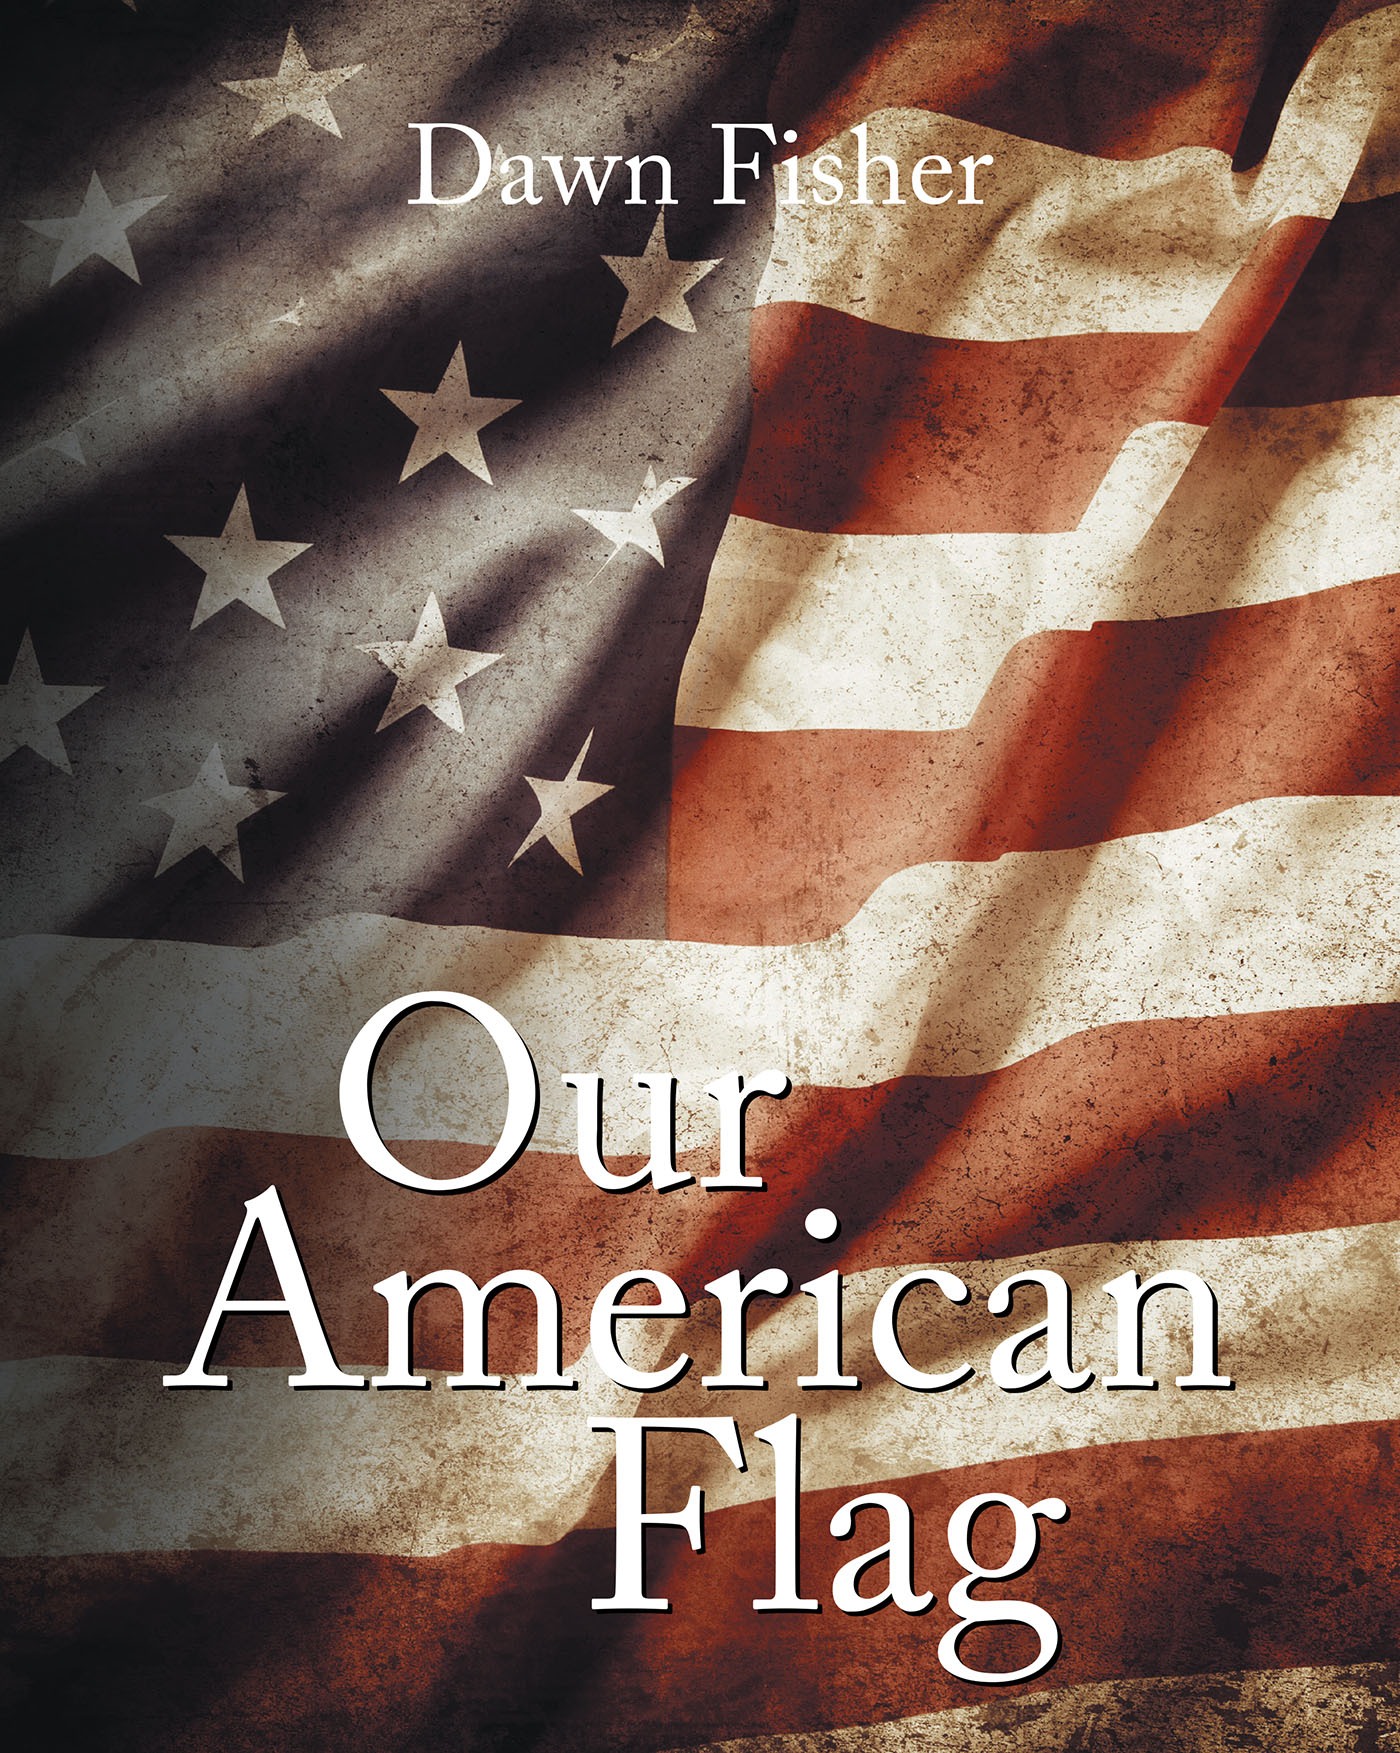 Author Dawn Fisher’s New Book, “Our American Flag,” is a Captivating Look at the Interesting History Behind America’s Flag and Its Different Iterations Over the Years